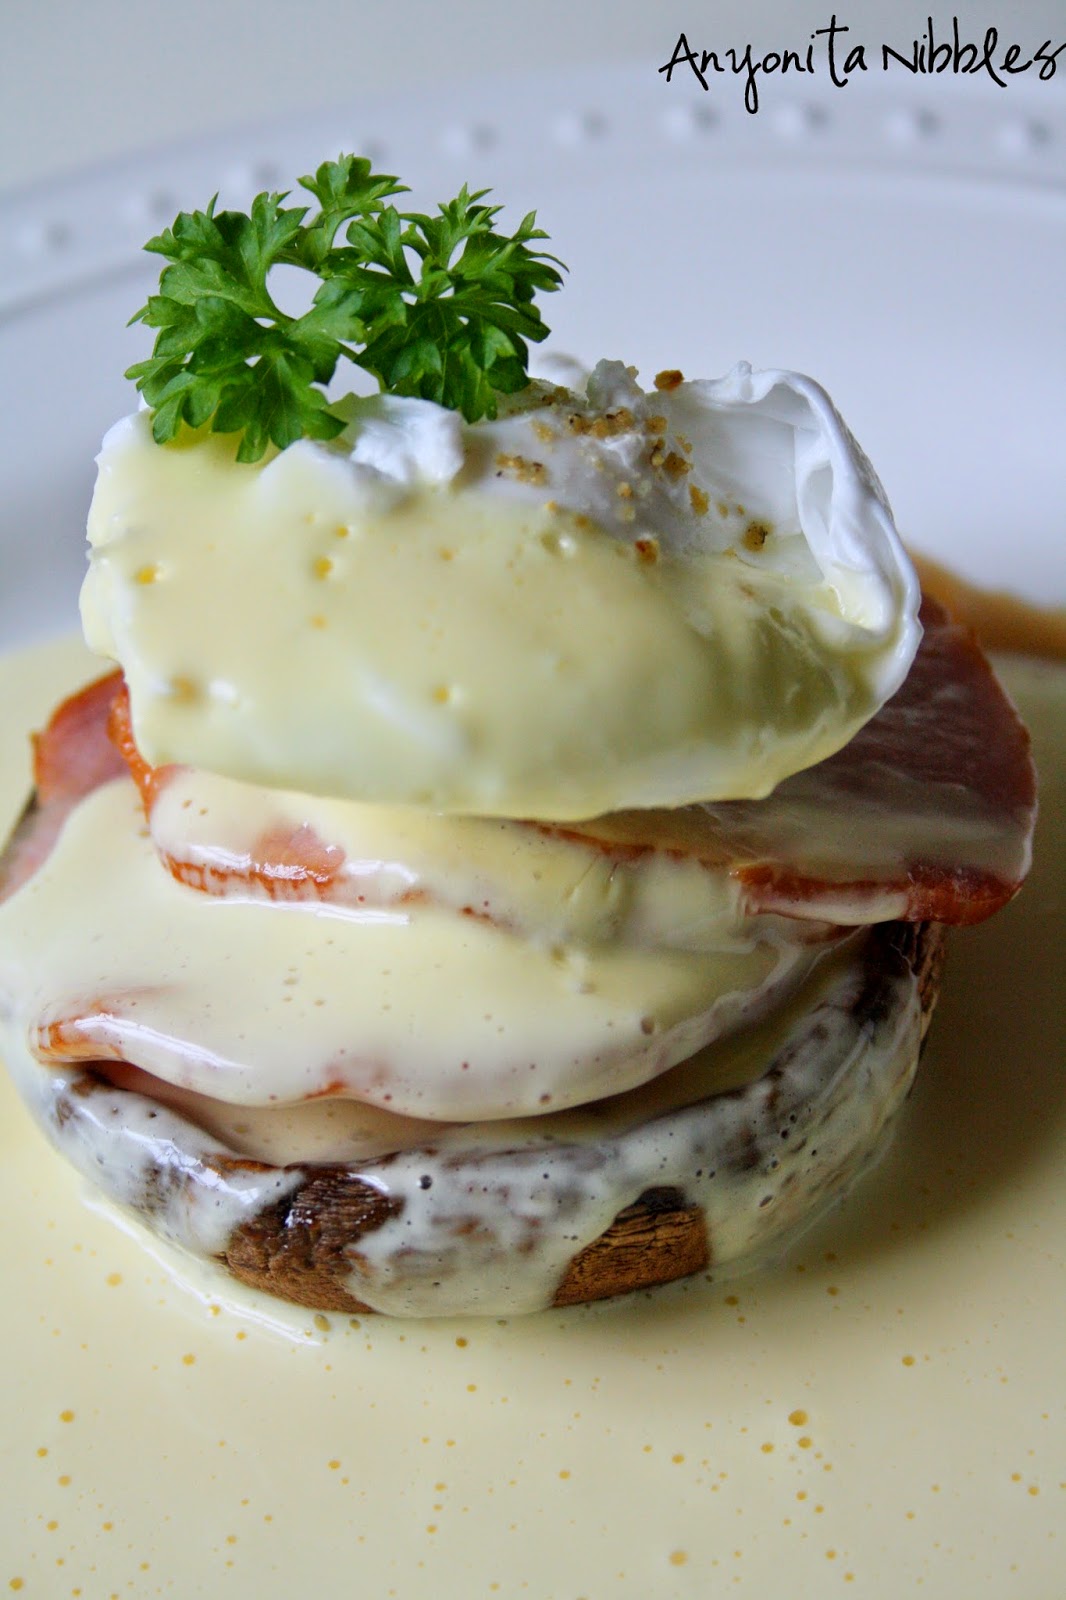 http://www.anyonita-nibbles.co.uk/2014/05/gluten-free-eggs-benedict-easiest-blender-hollandaise-grilled-portabello.html